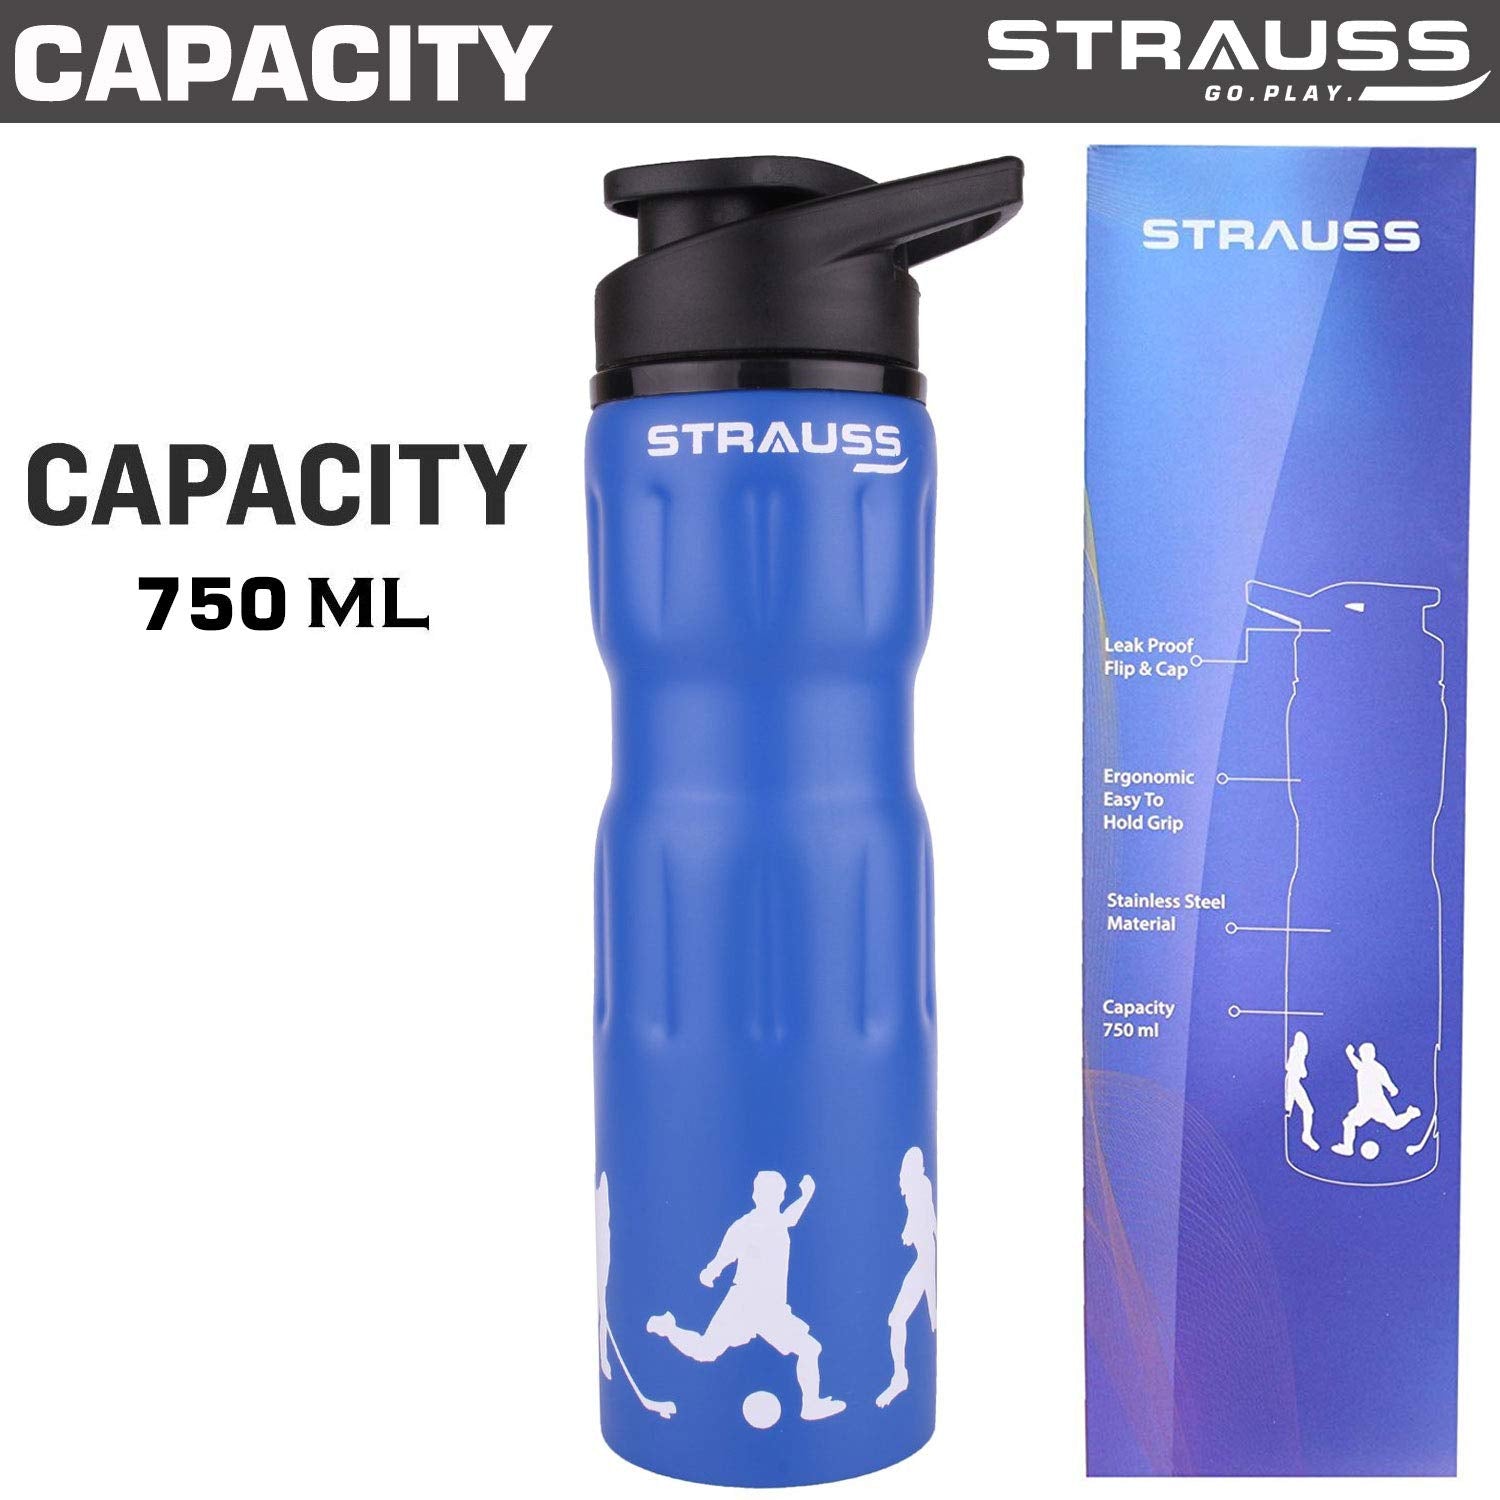 STRAUSS Stainless Steel Water Bottle, 750ml (Blue), Pack of 1